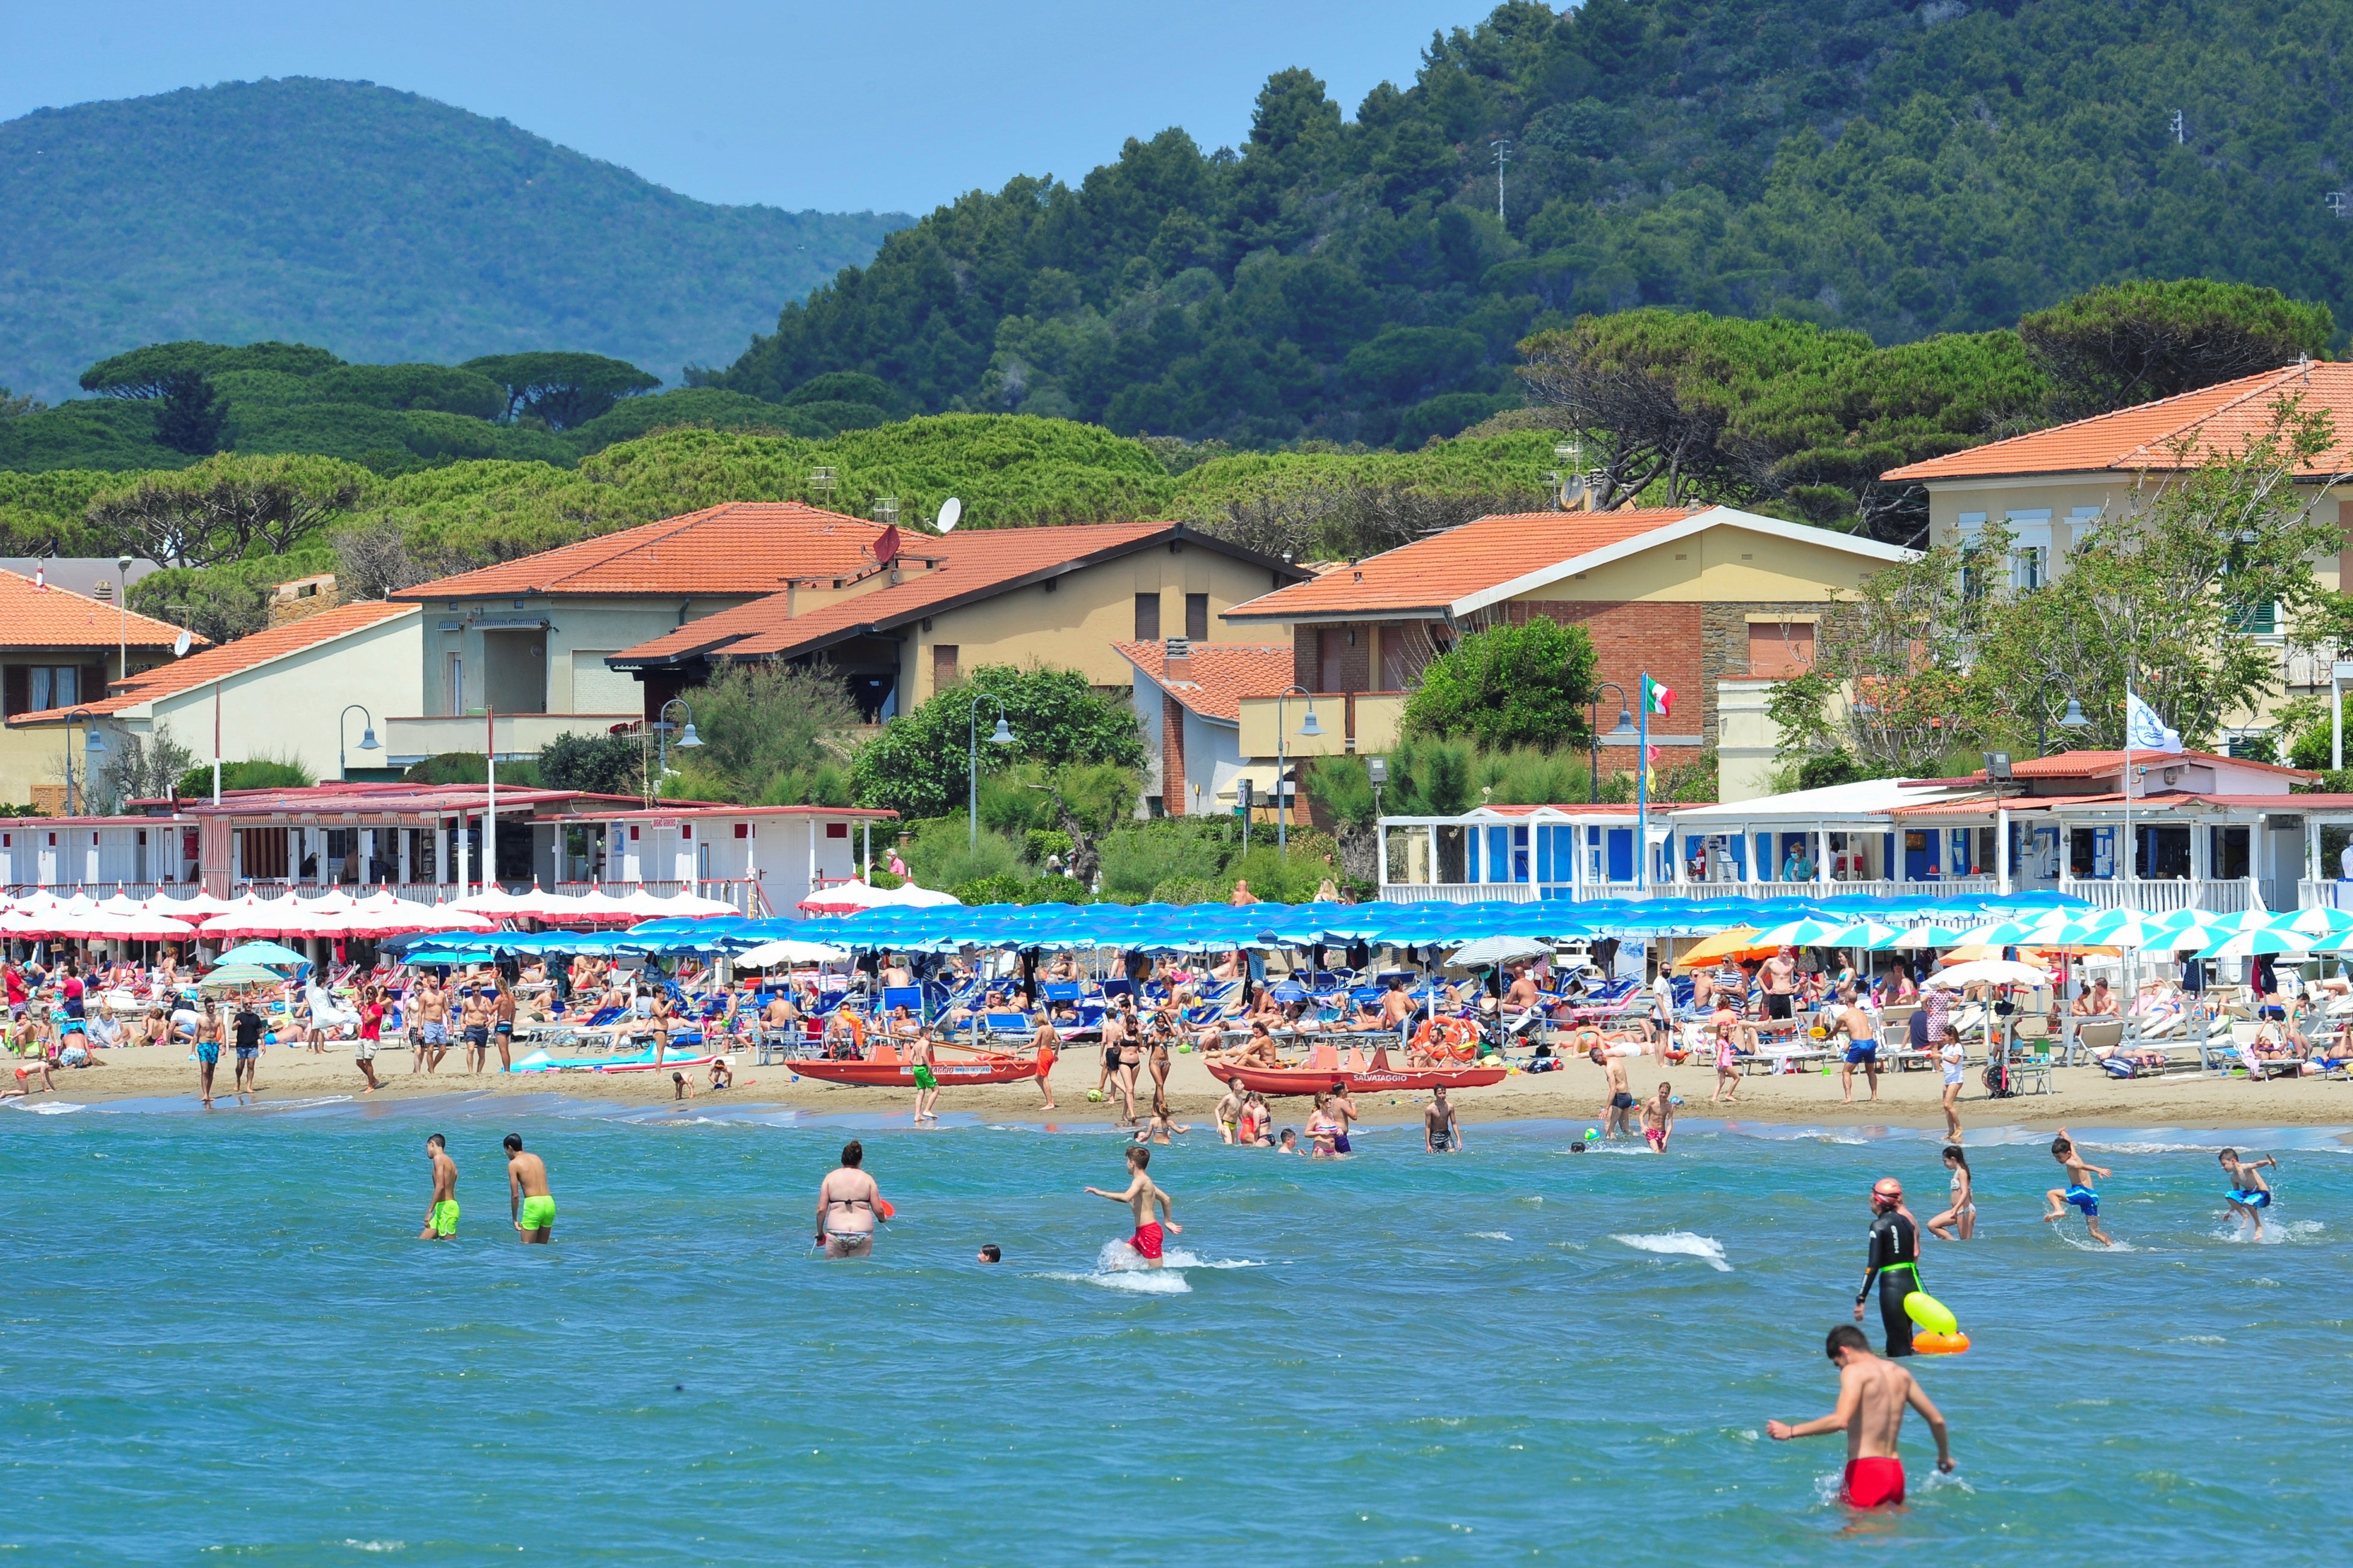 A view of the shore from the sea, with swimmers, sunbathers, and small beach houses in the background.